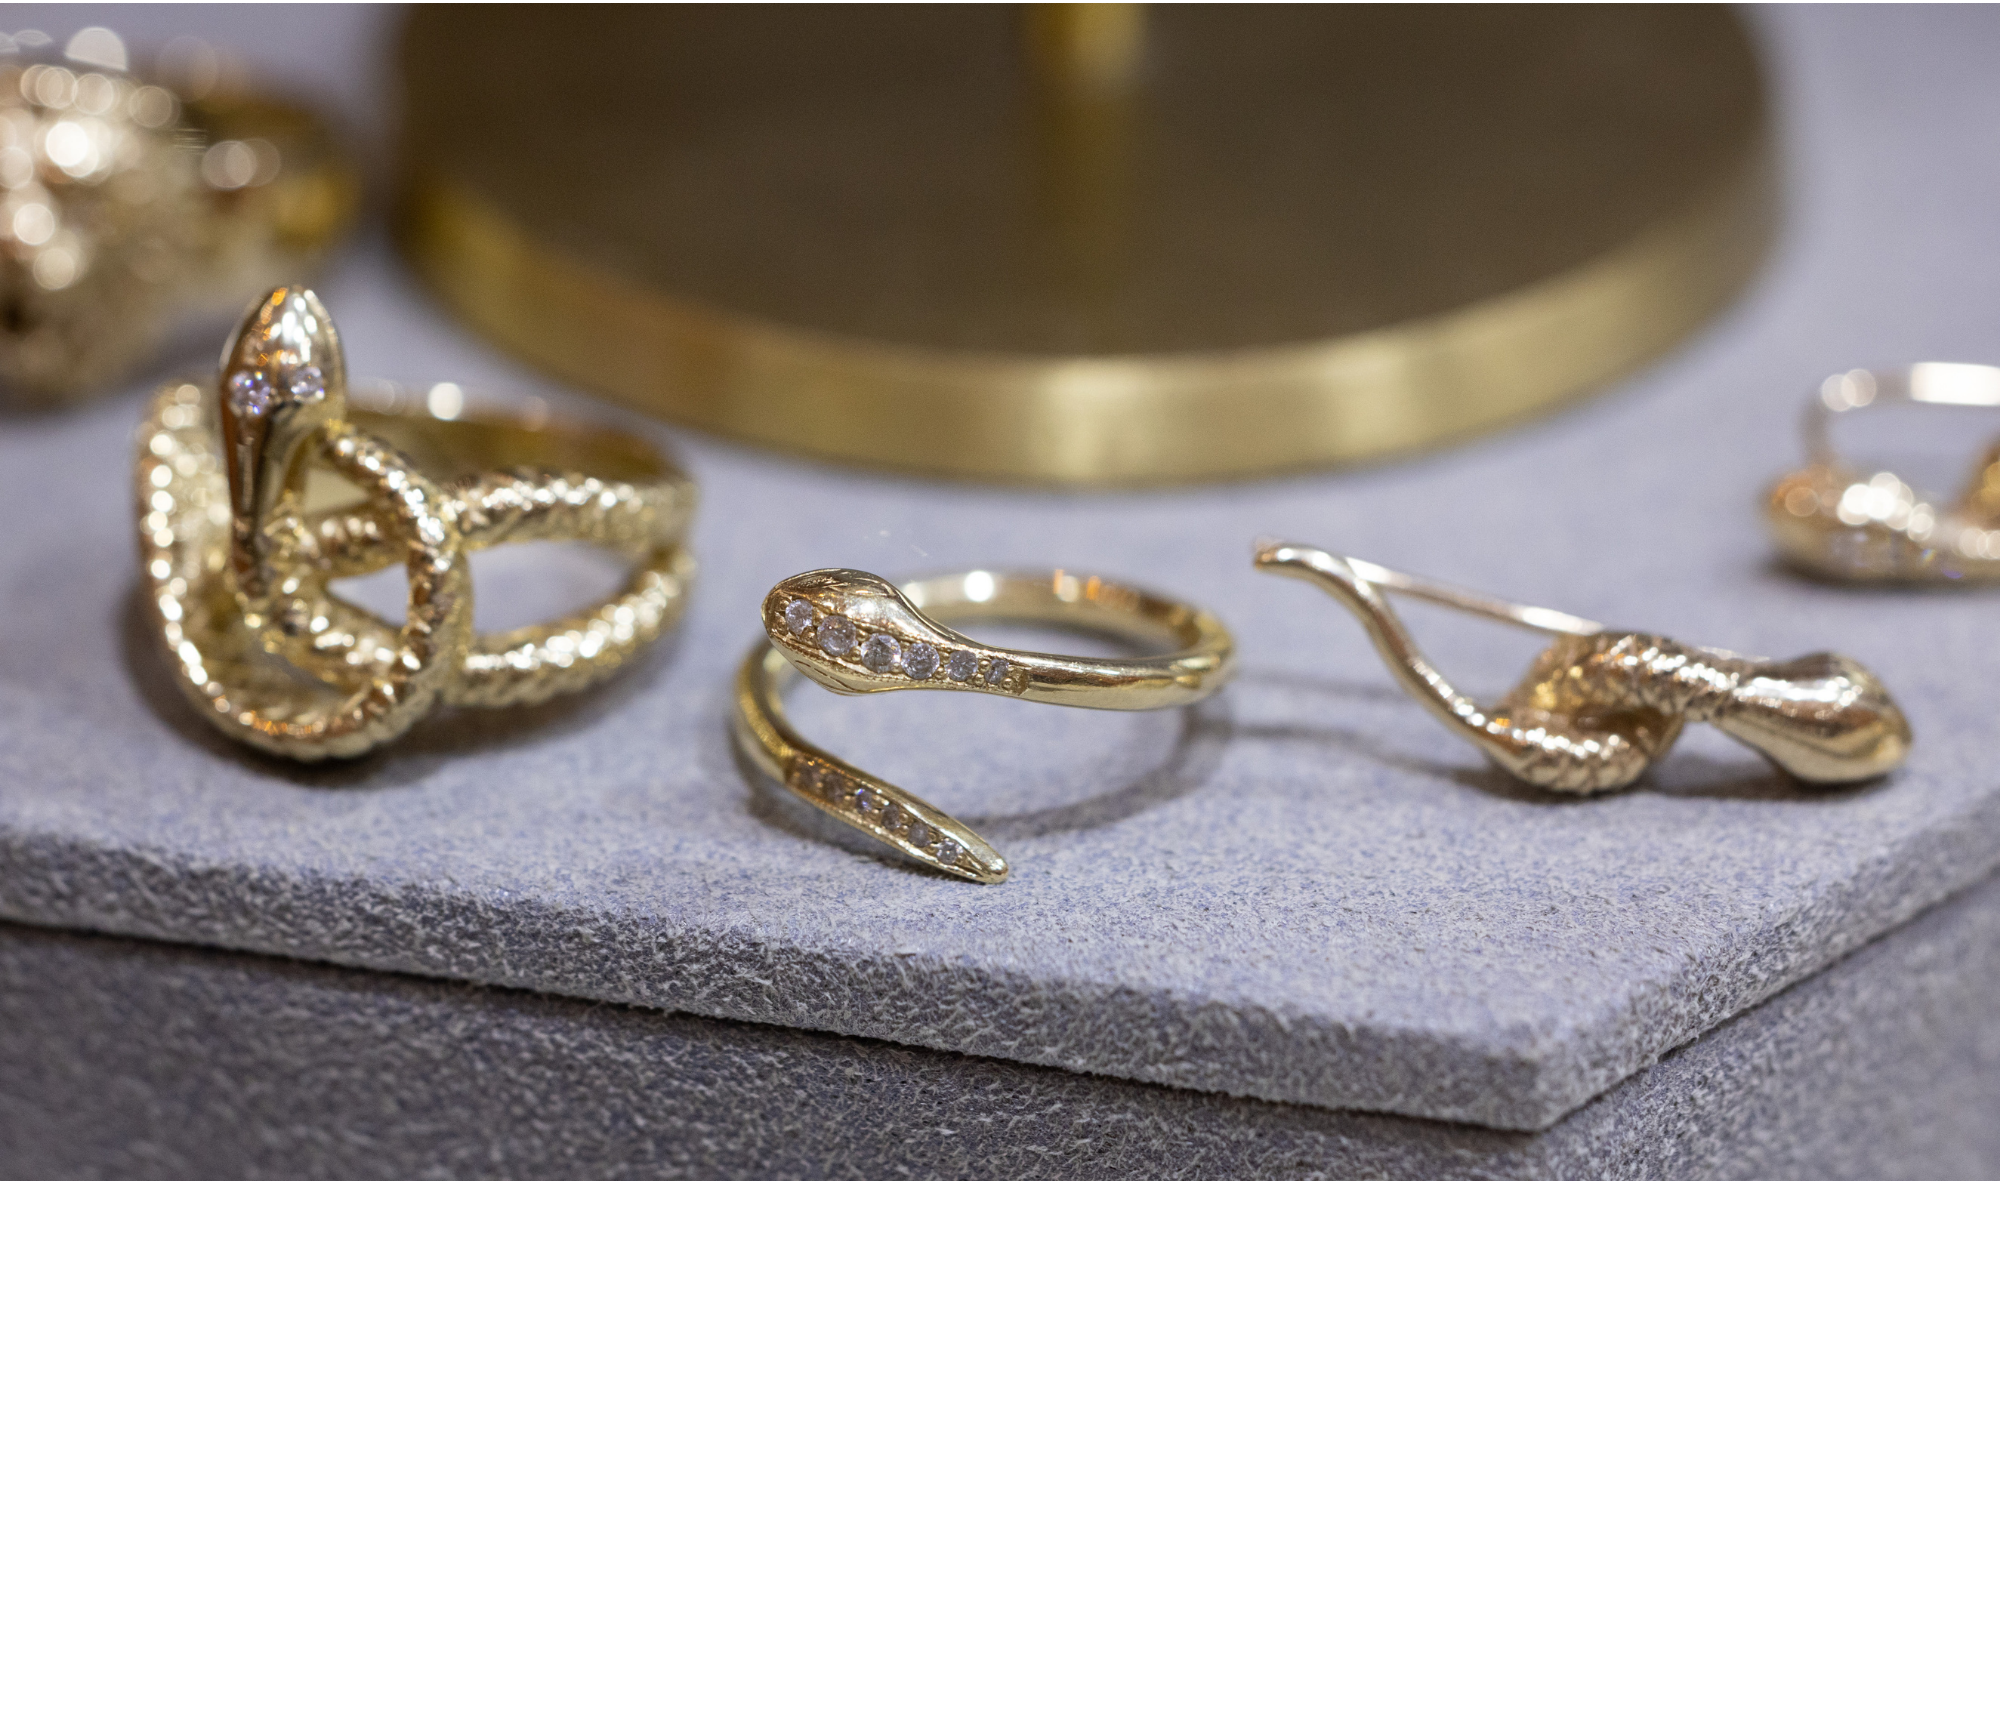 14k Twisted Snake with Diamonds Ring, $2,200, available at Zoë Chicco